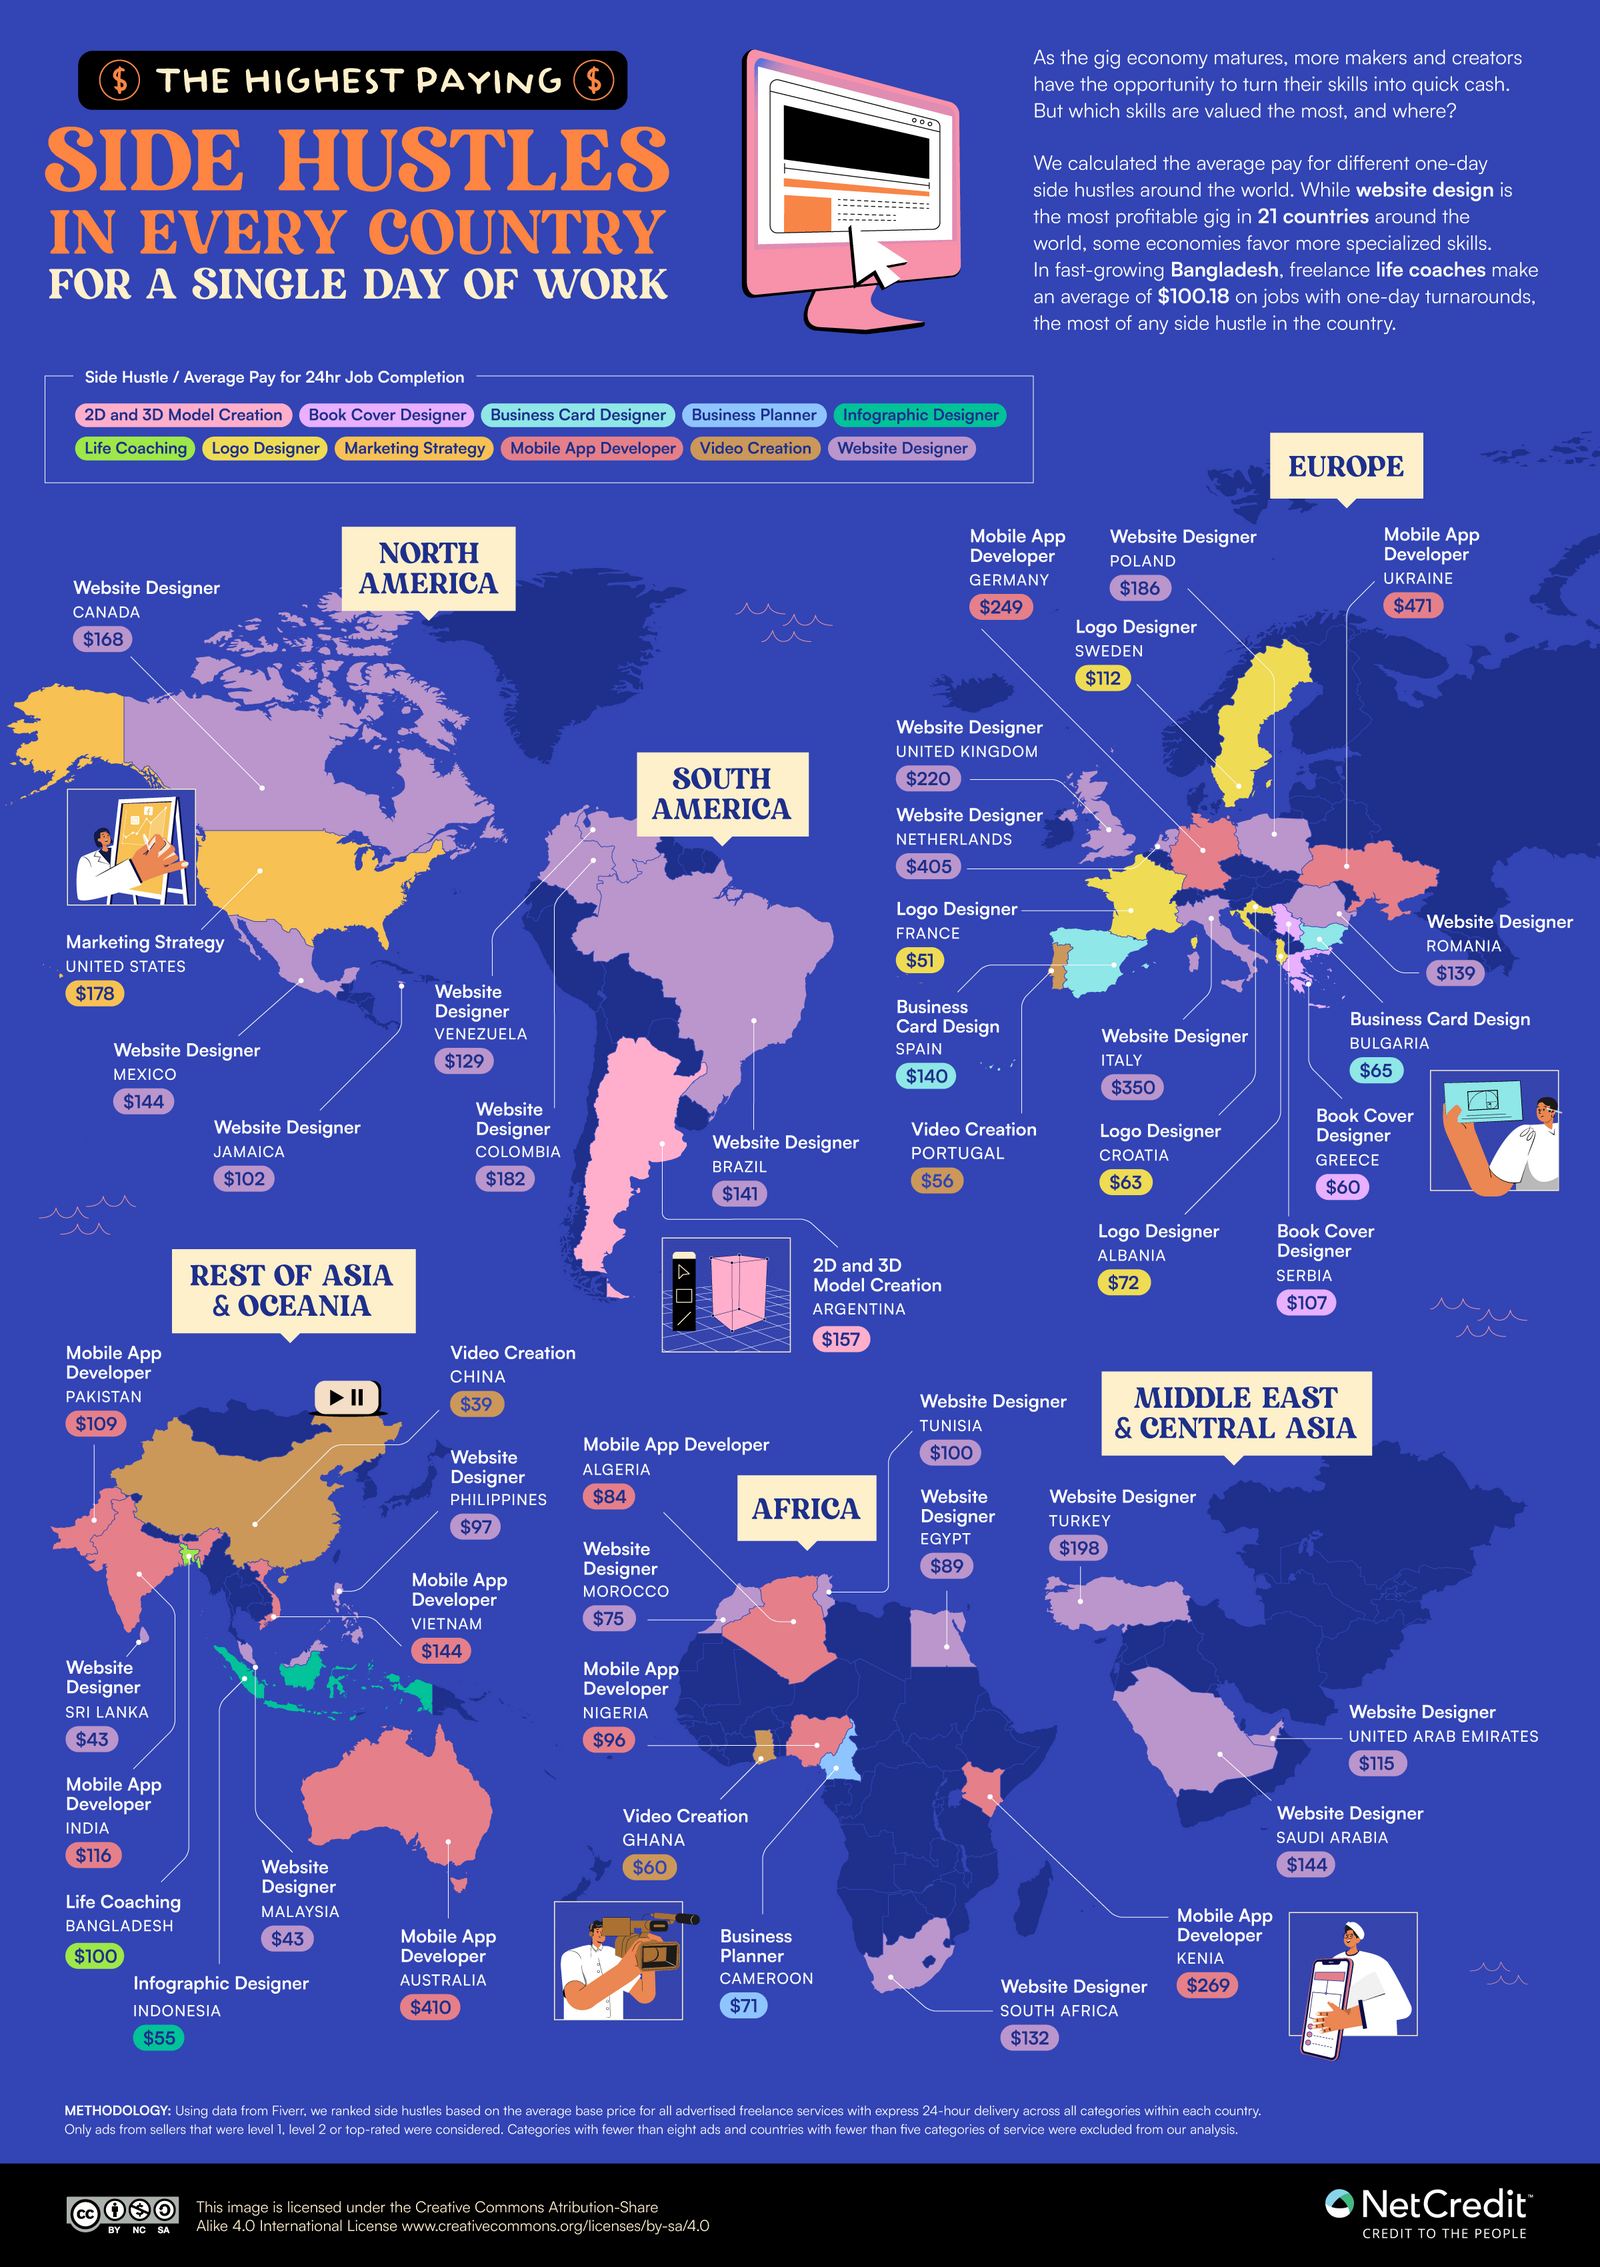 The Highest Paying Side Hustles In Every Country - Infographic